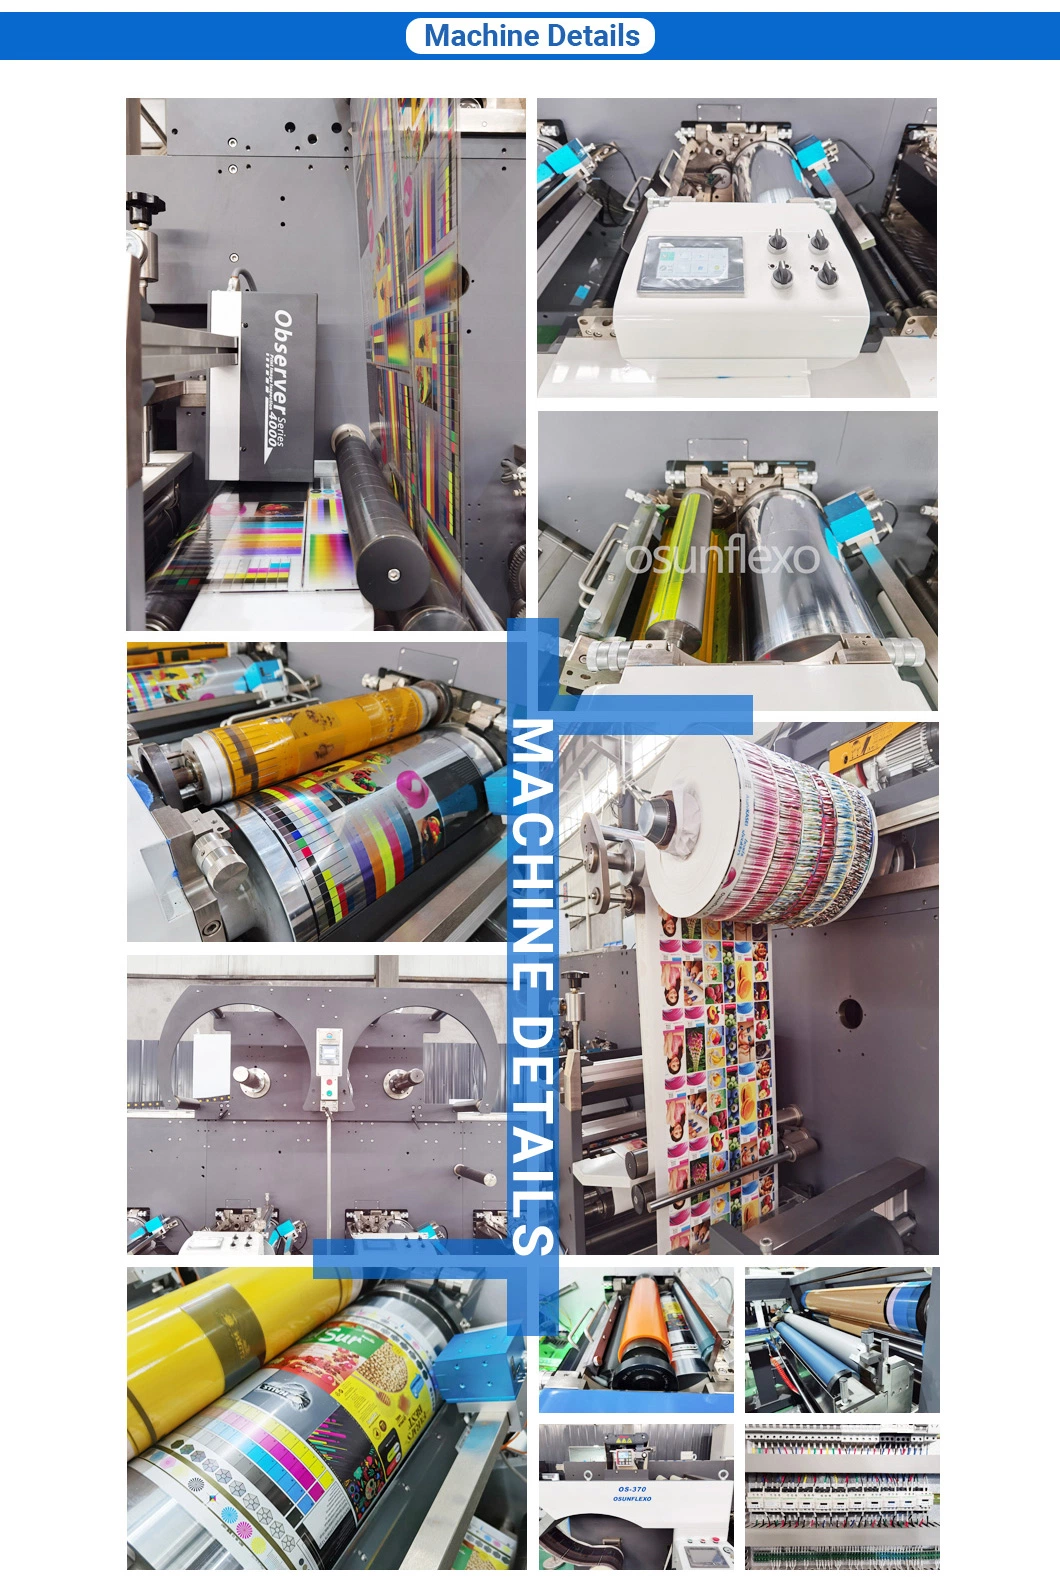 Specialized Designed Customized Multifunctional Combination Die Cutting Creasing Machine